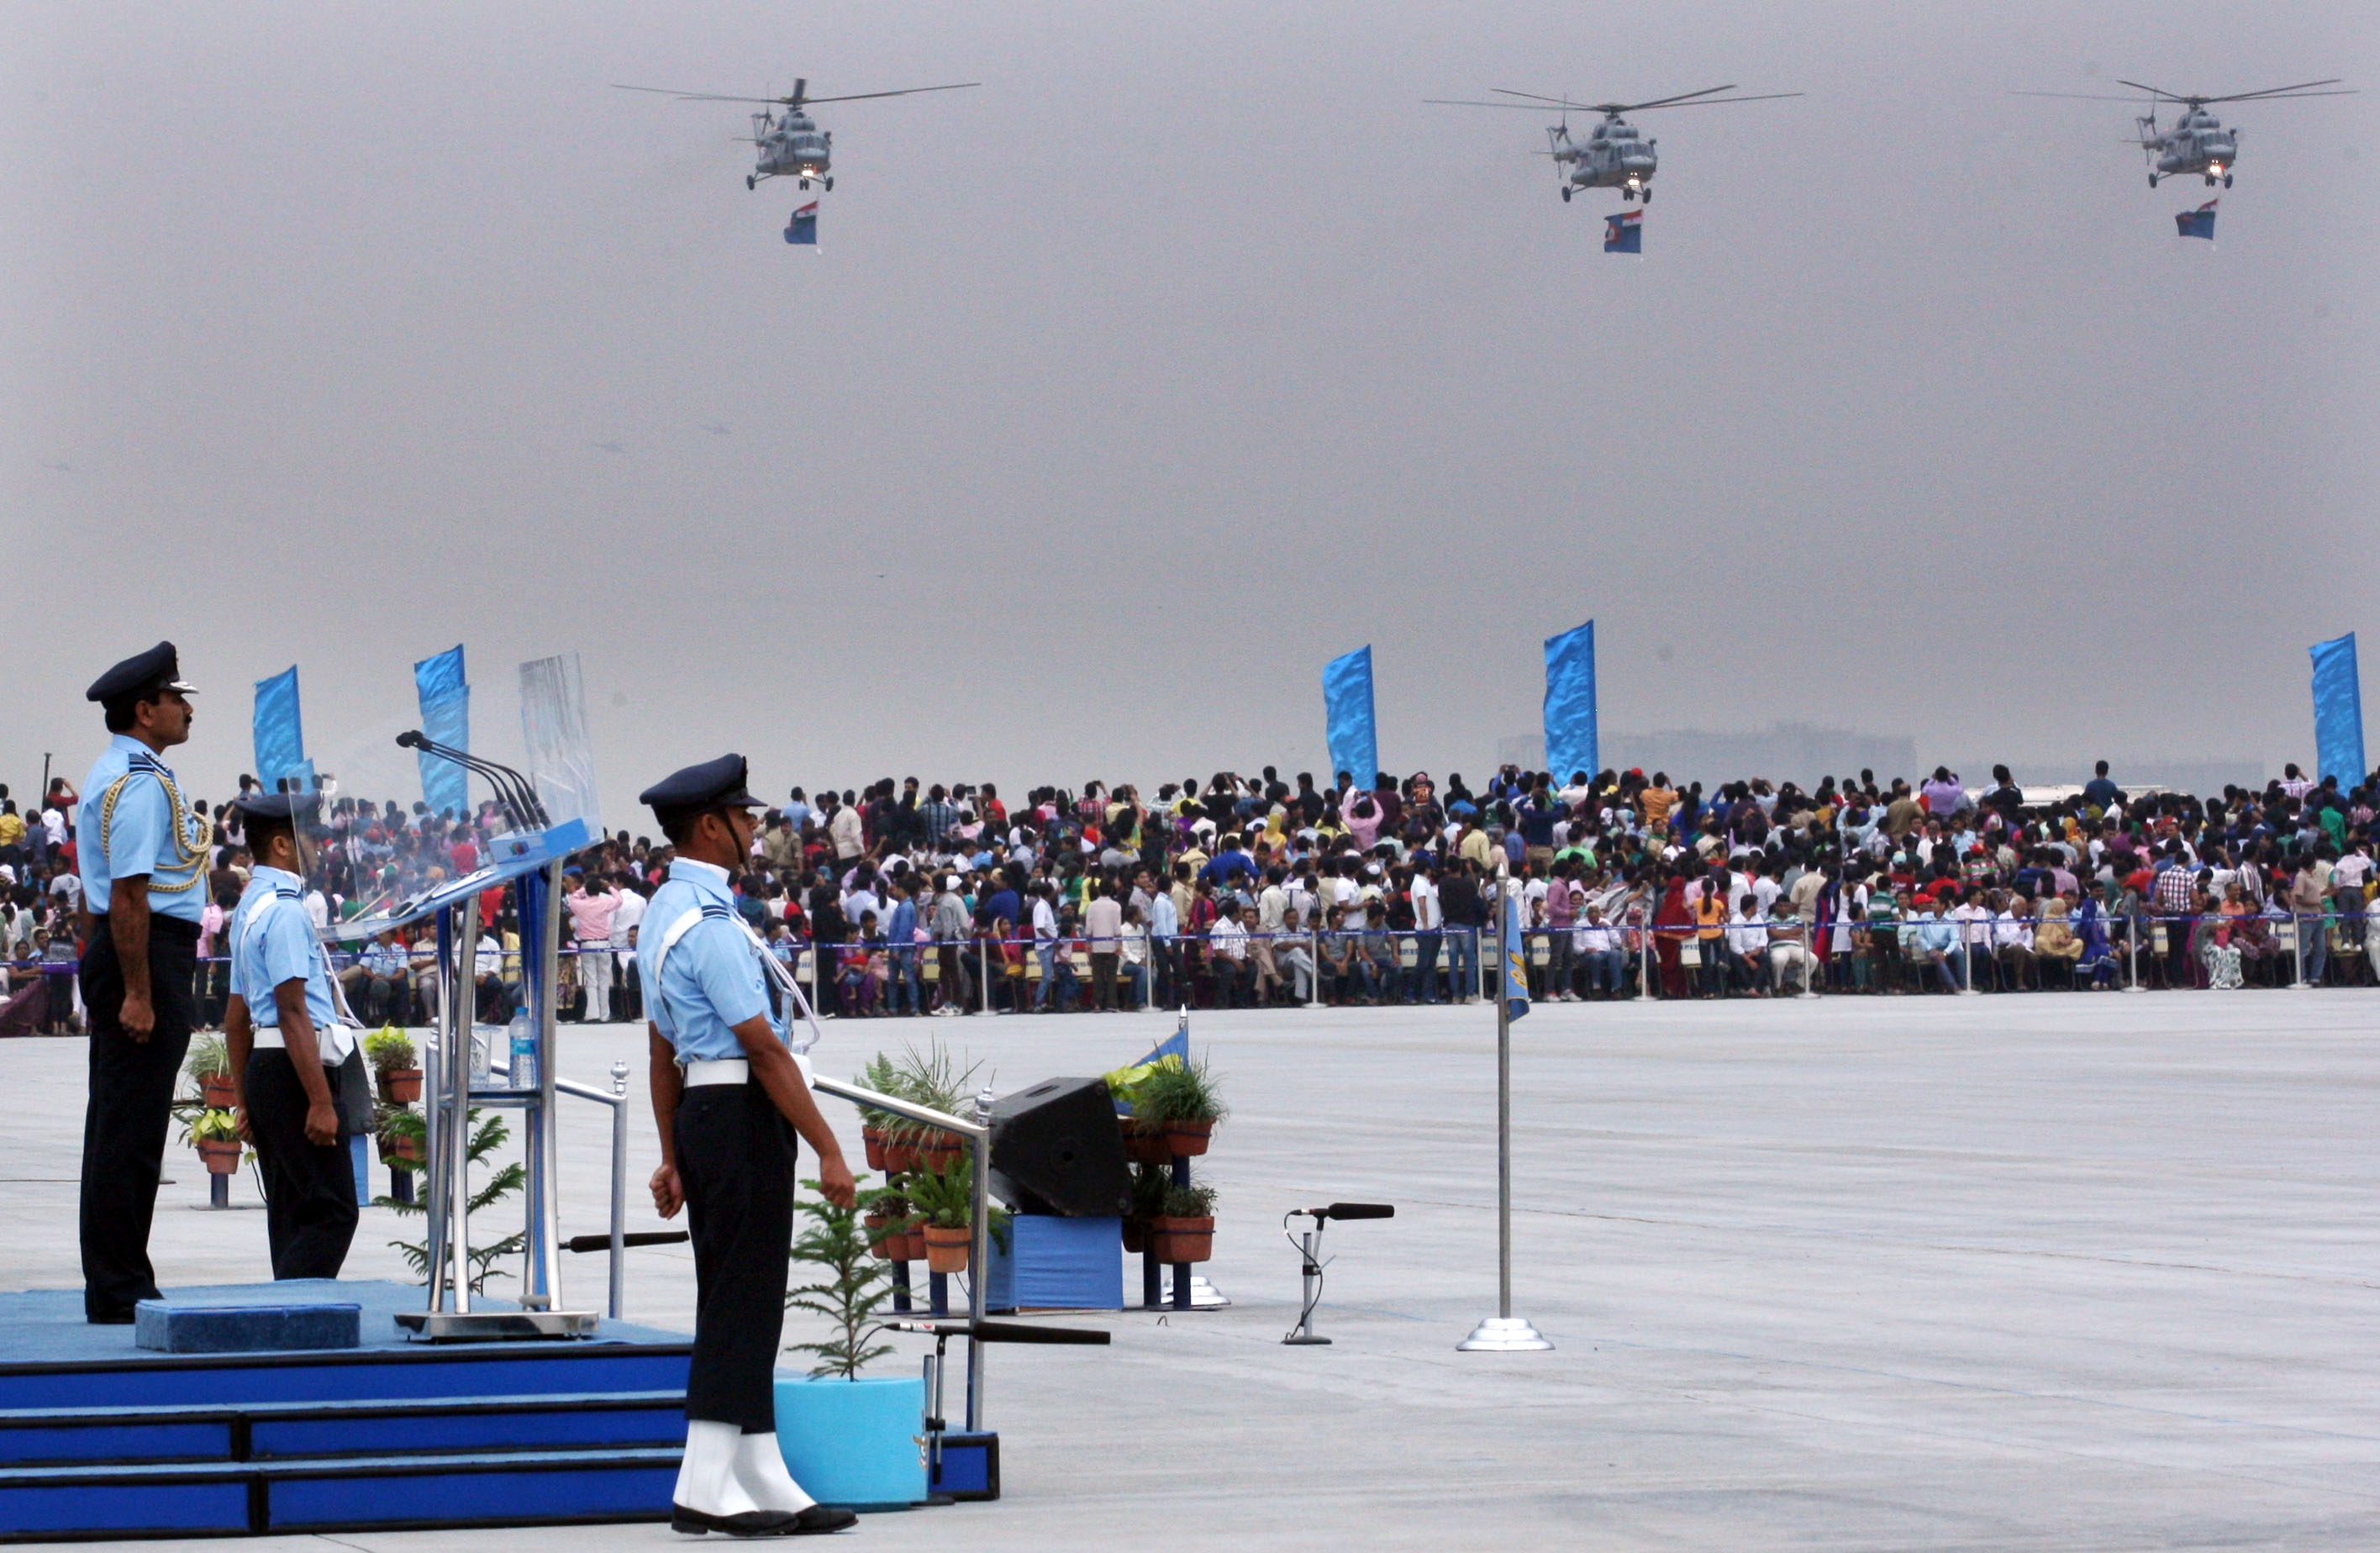 Glimpses-of-Indian-Air-Force-Day-2014-PHOTO-1.jpg